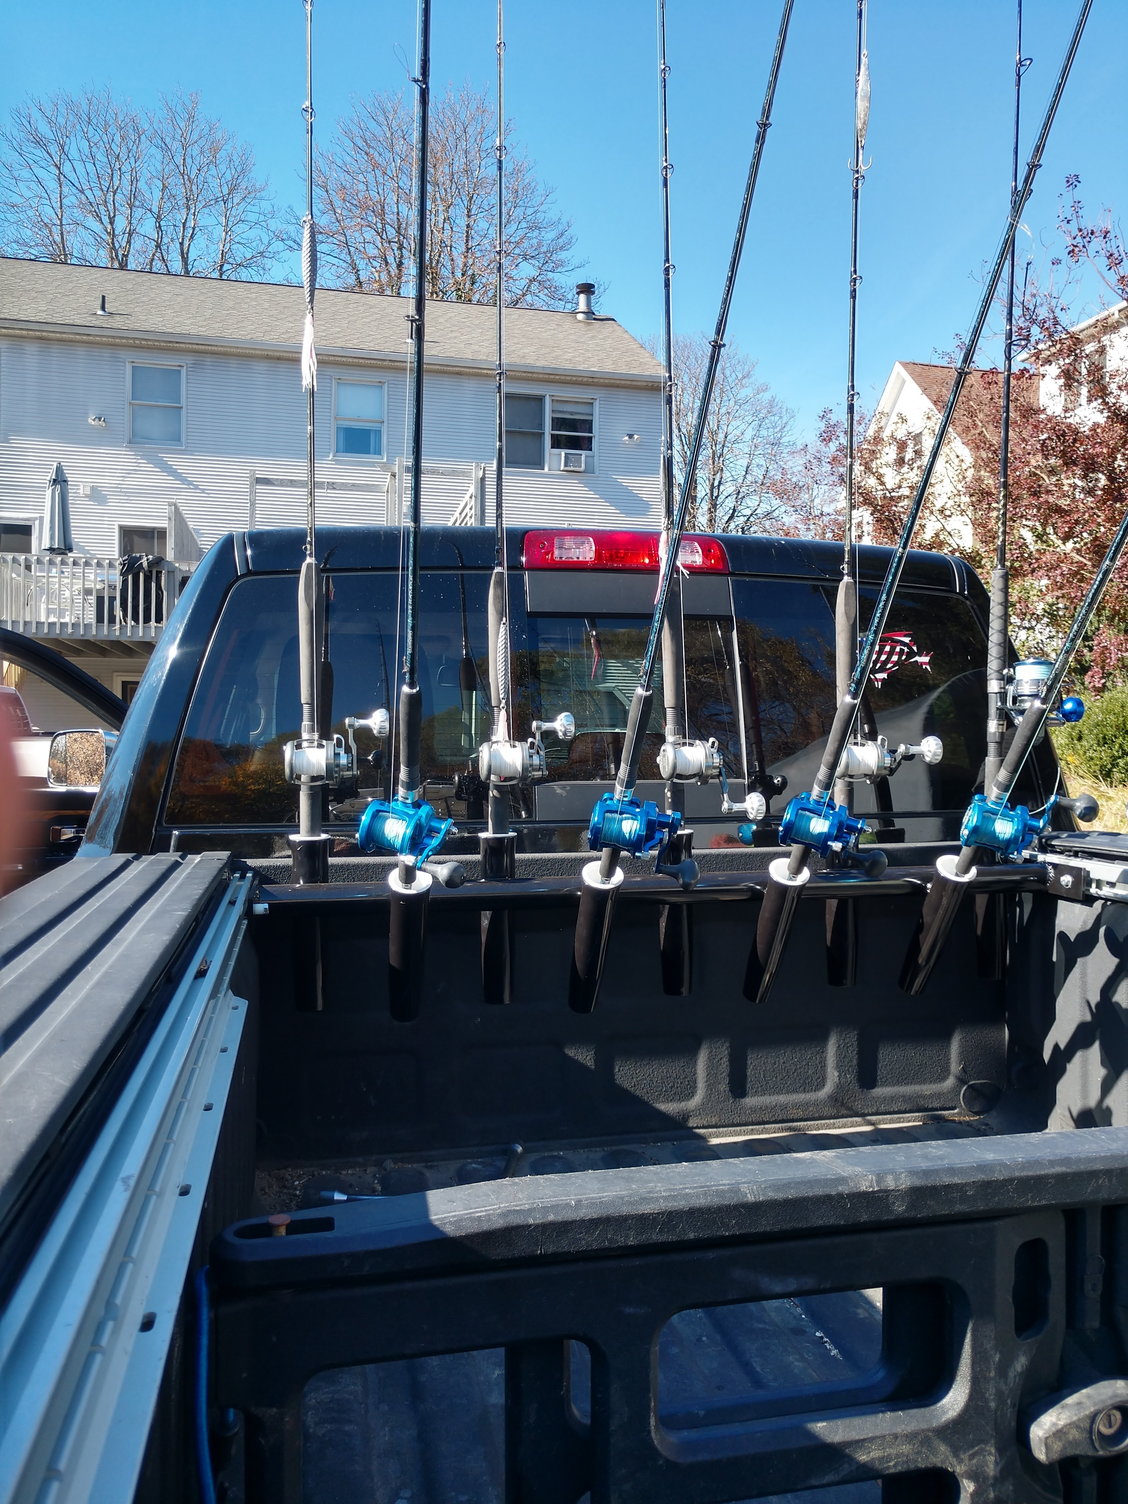 truck bed rod holders - The Hull Truth - Boating and Fishing Forum